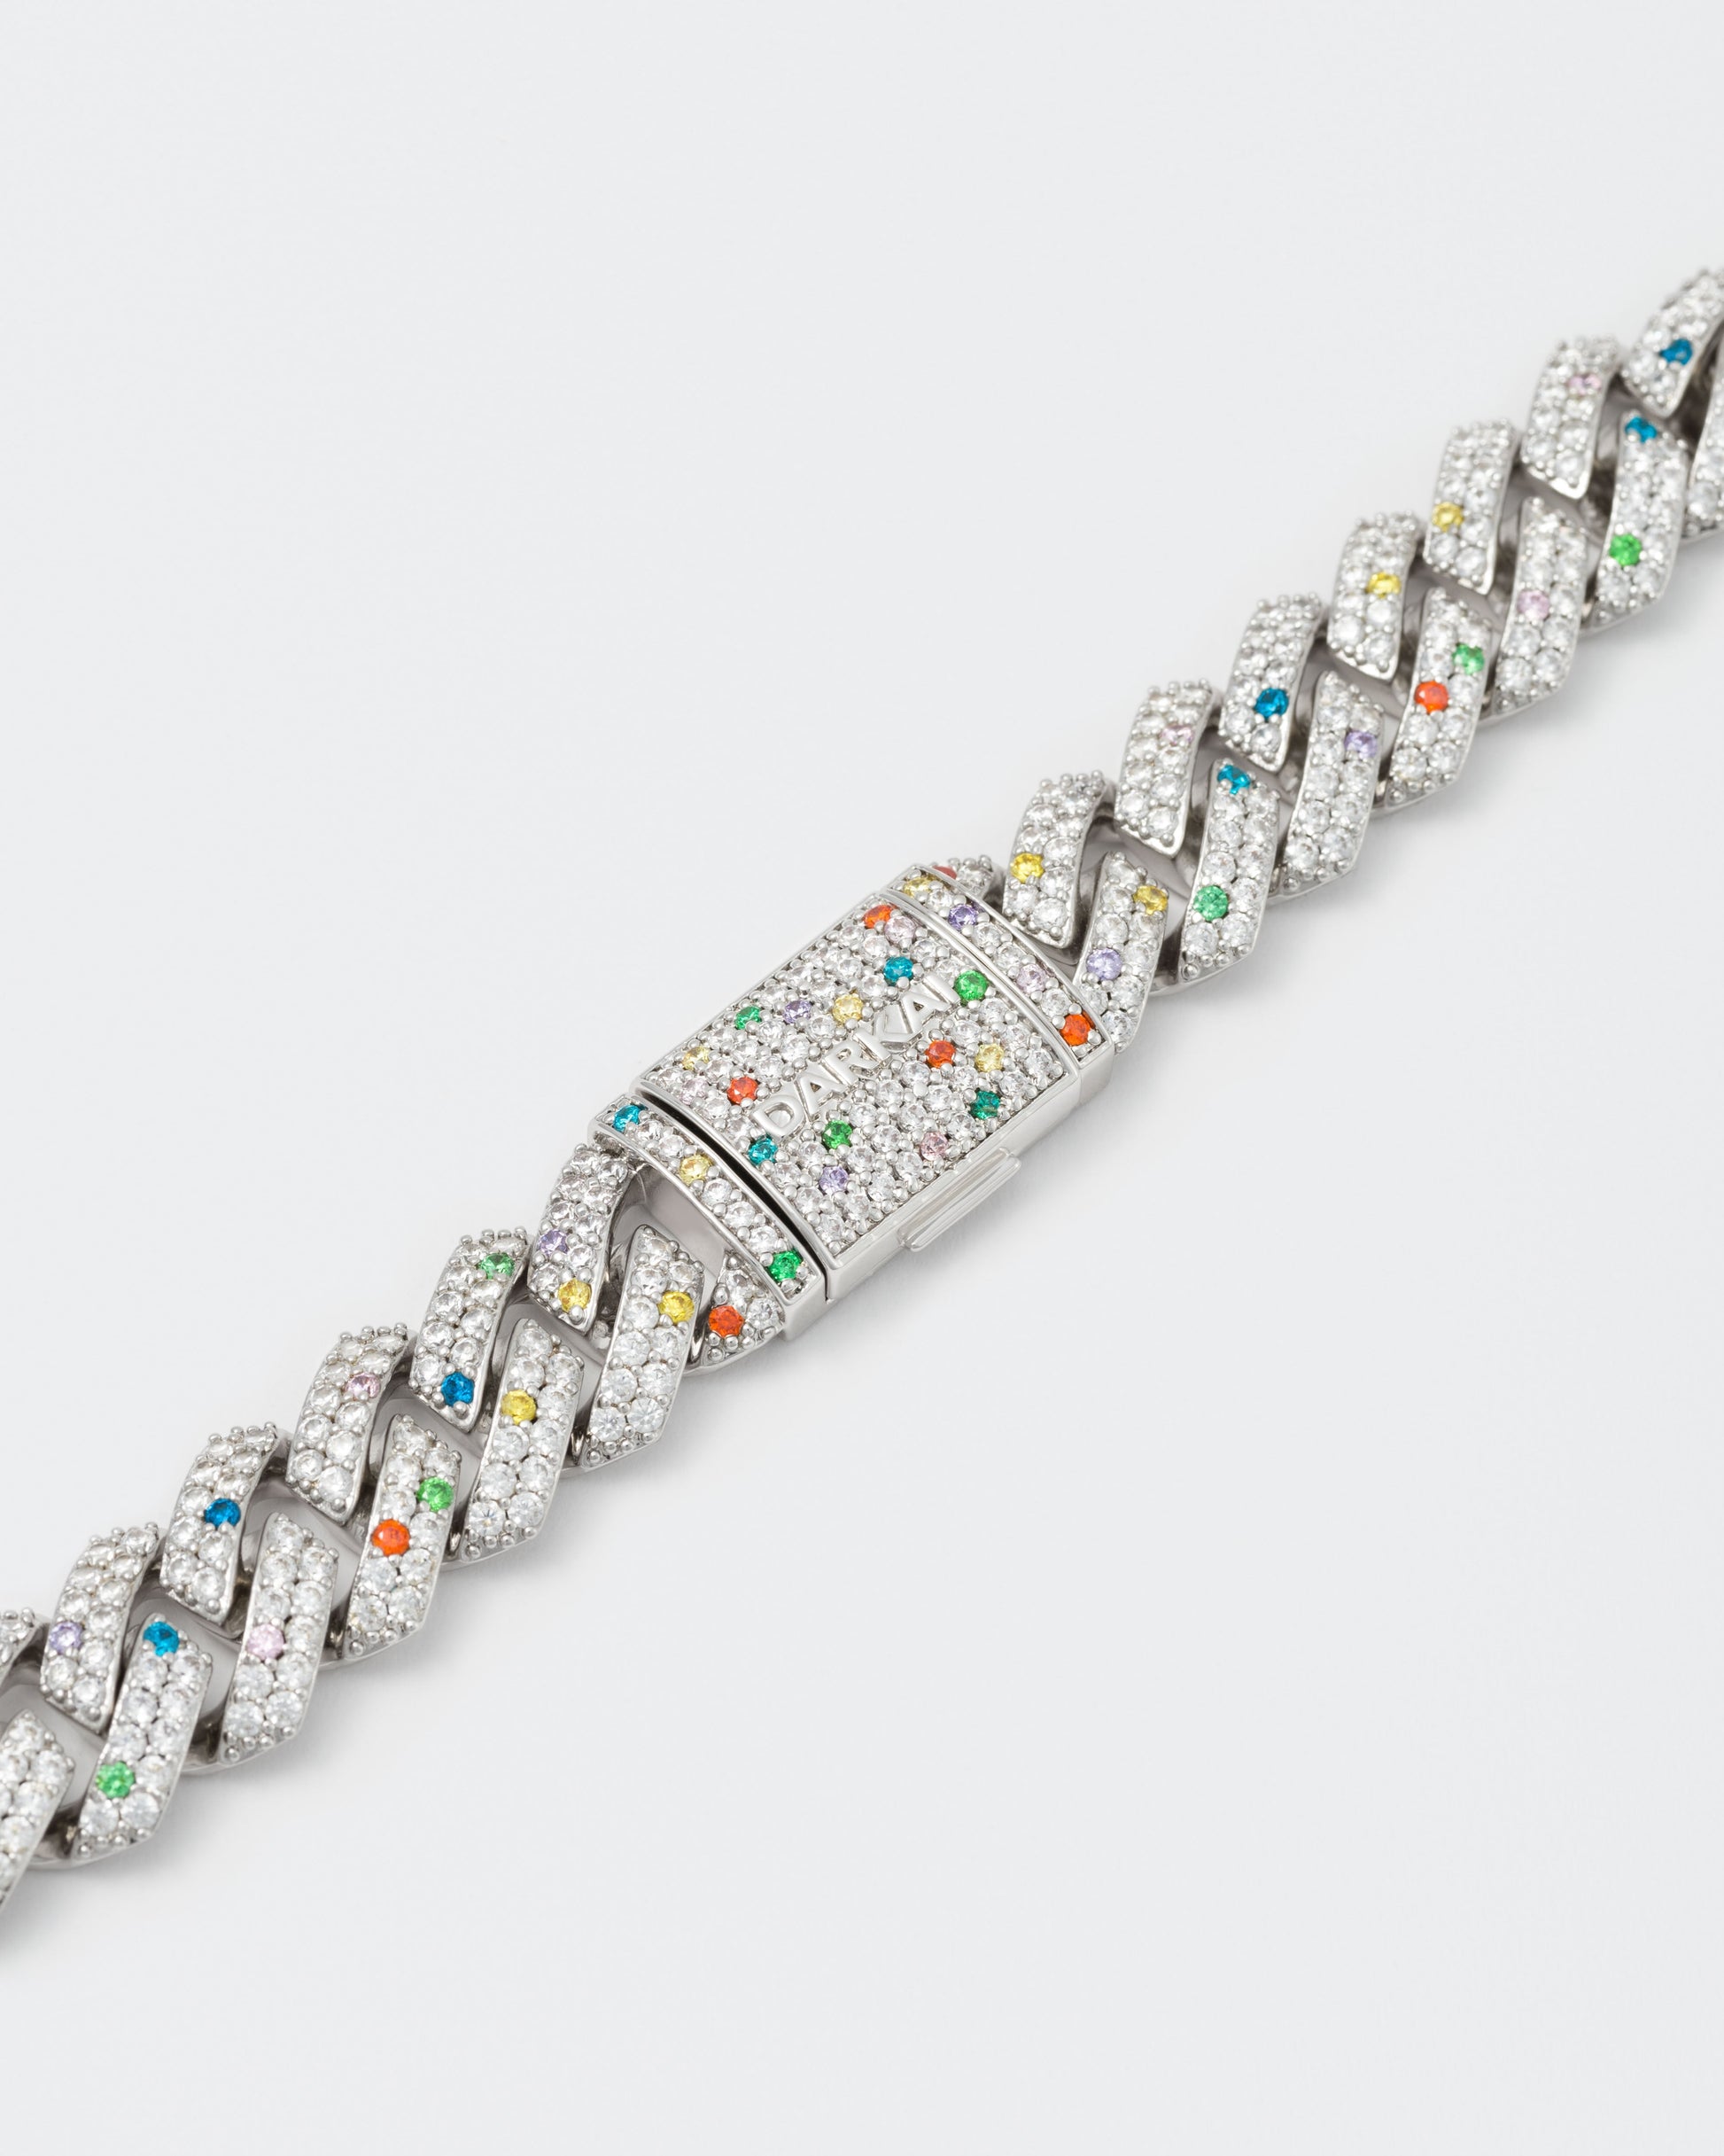 detail of the bracelet clasp with hand-set micropavé stones in white, violet, orange red, green, golden yellow and topaz blue